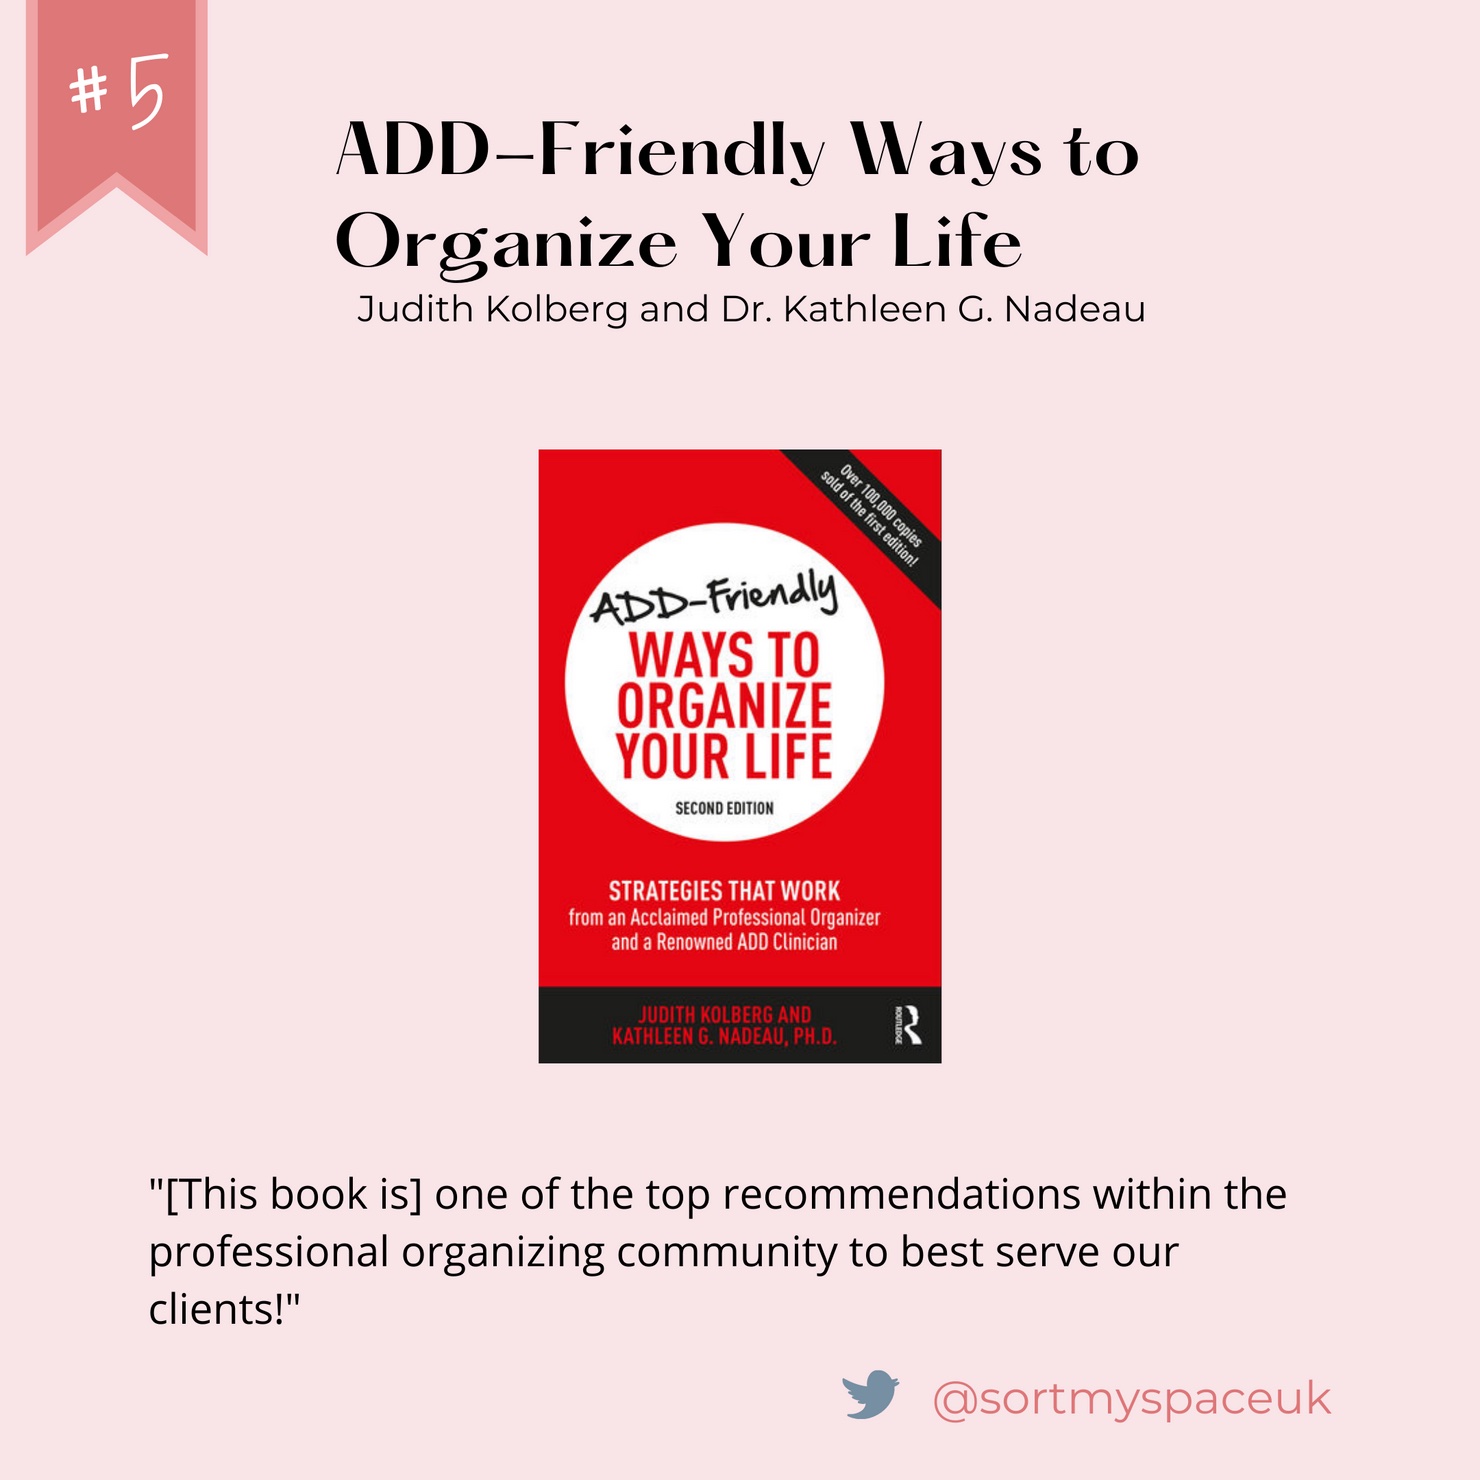 Number 5: ADD-Friendly Ways to Organize Your Life. Written by Judith Kolberg and Kathleen G. Nadeau. Quote from @sortmyspaceuk on Twitter: "[This book is] one of the top recommendations within the professional organizing community to best serve our clients!"